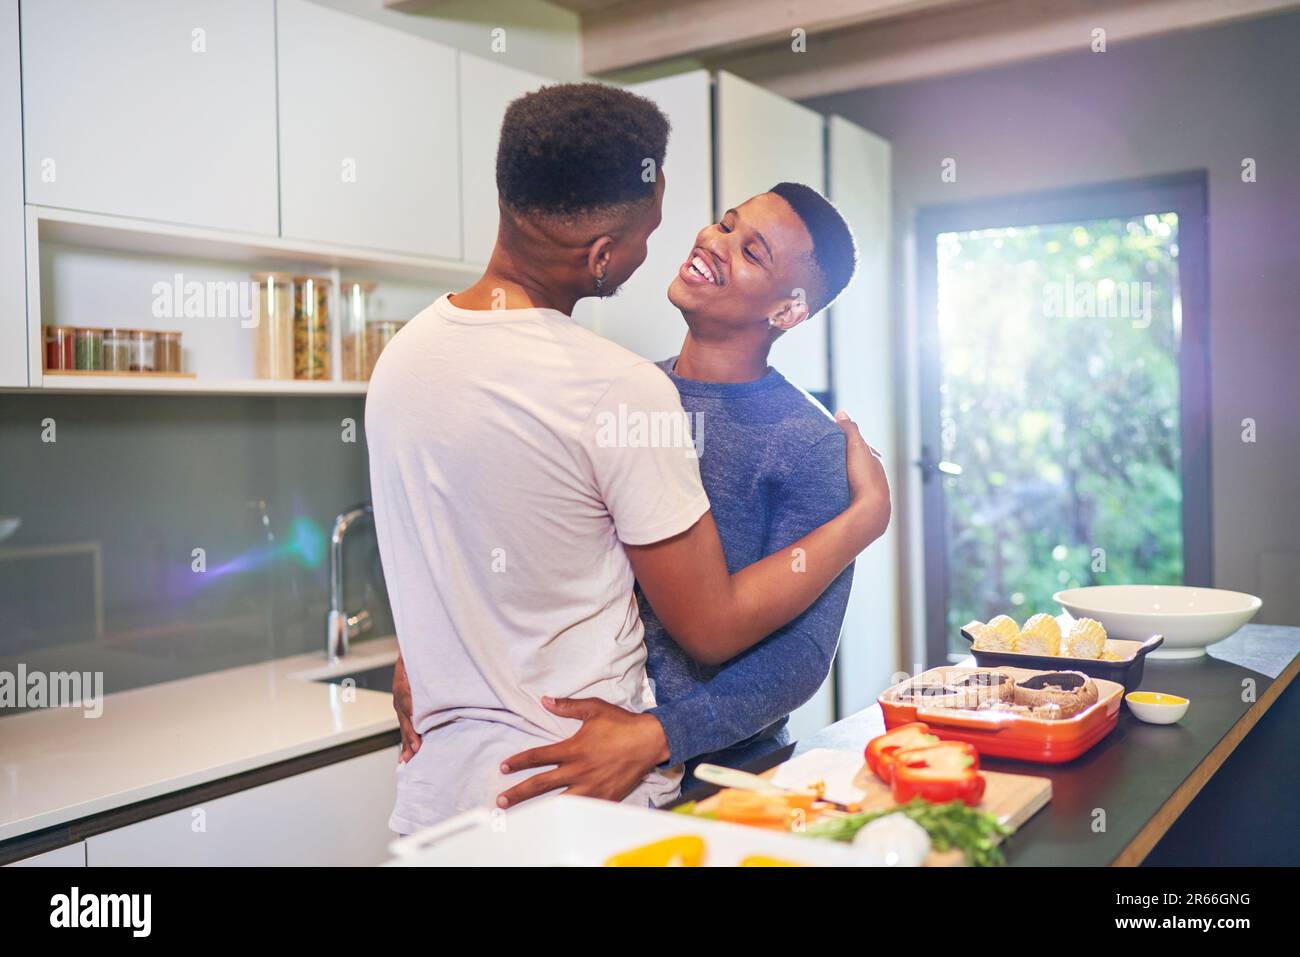 Happy, affectionate young gay male couple hugging and cooking at home Stock Photo